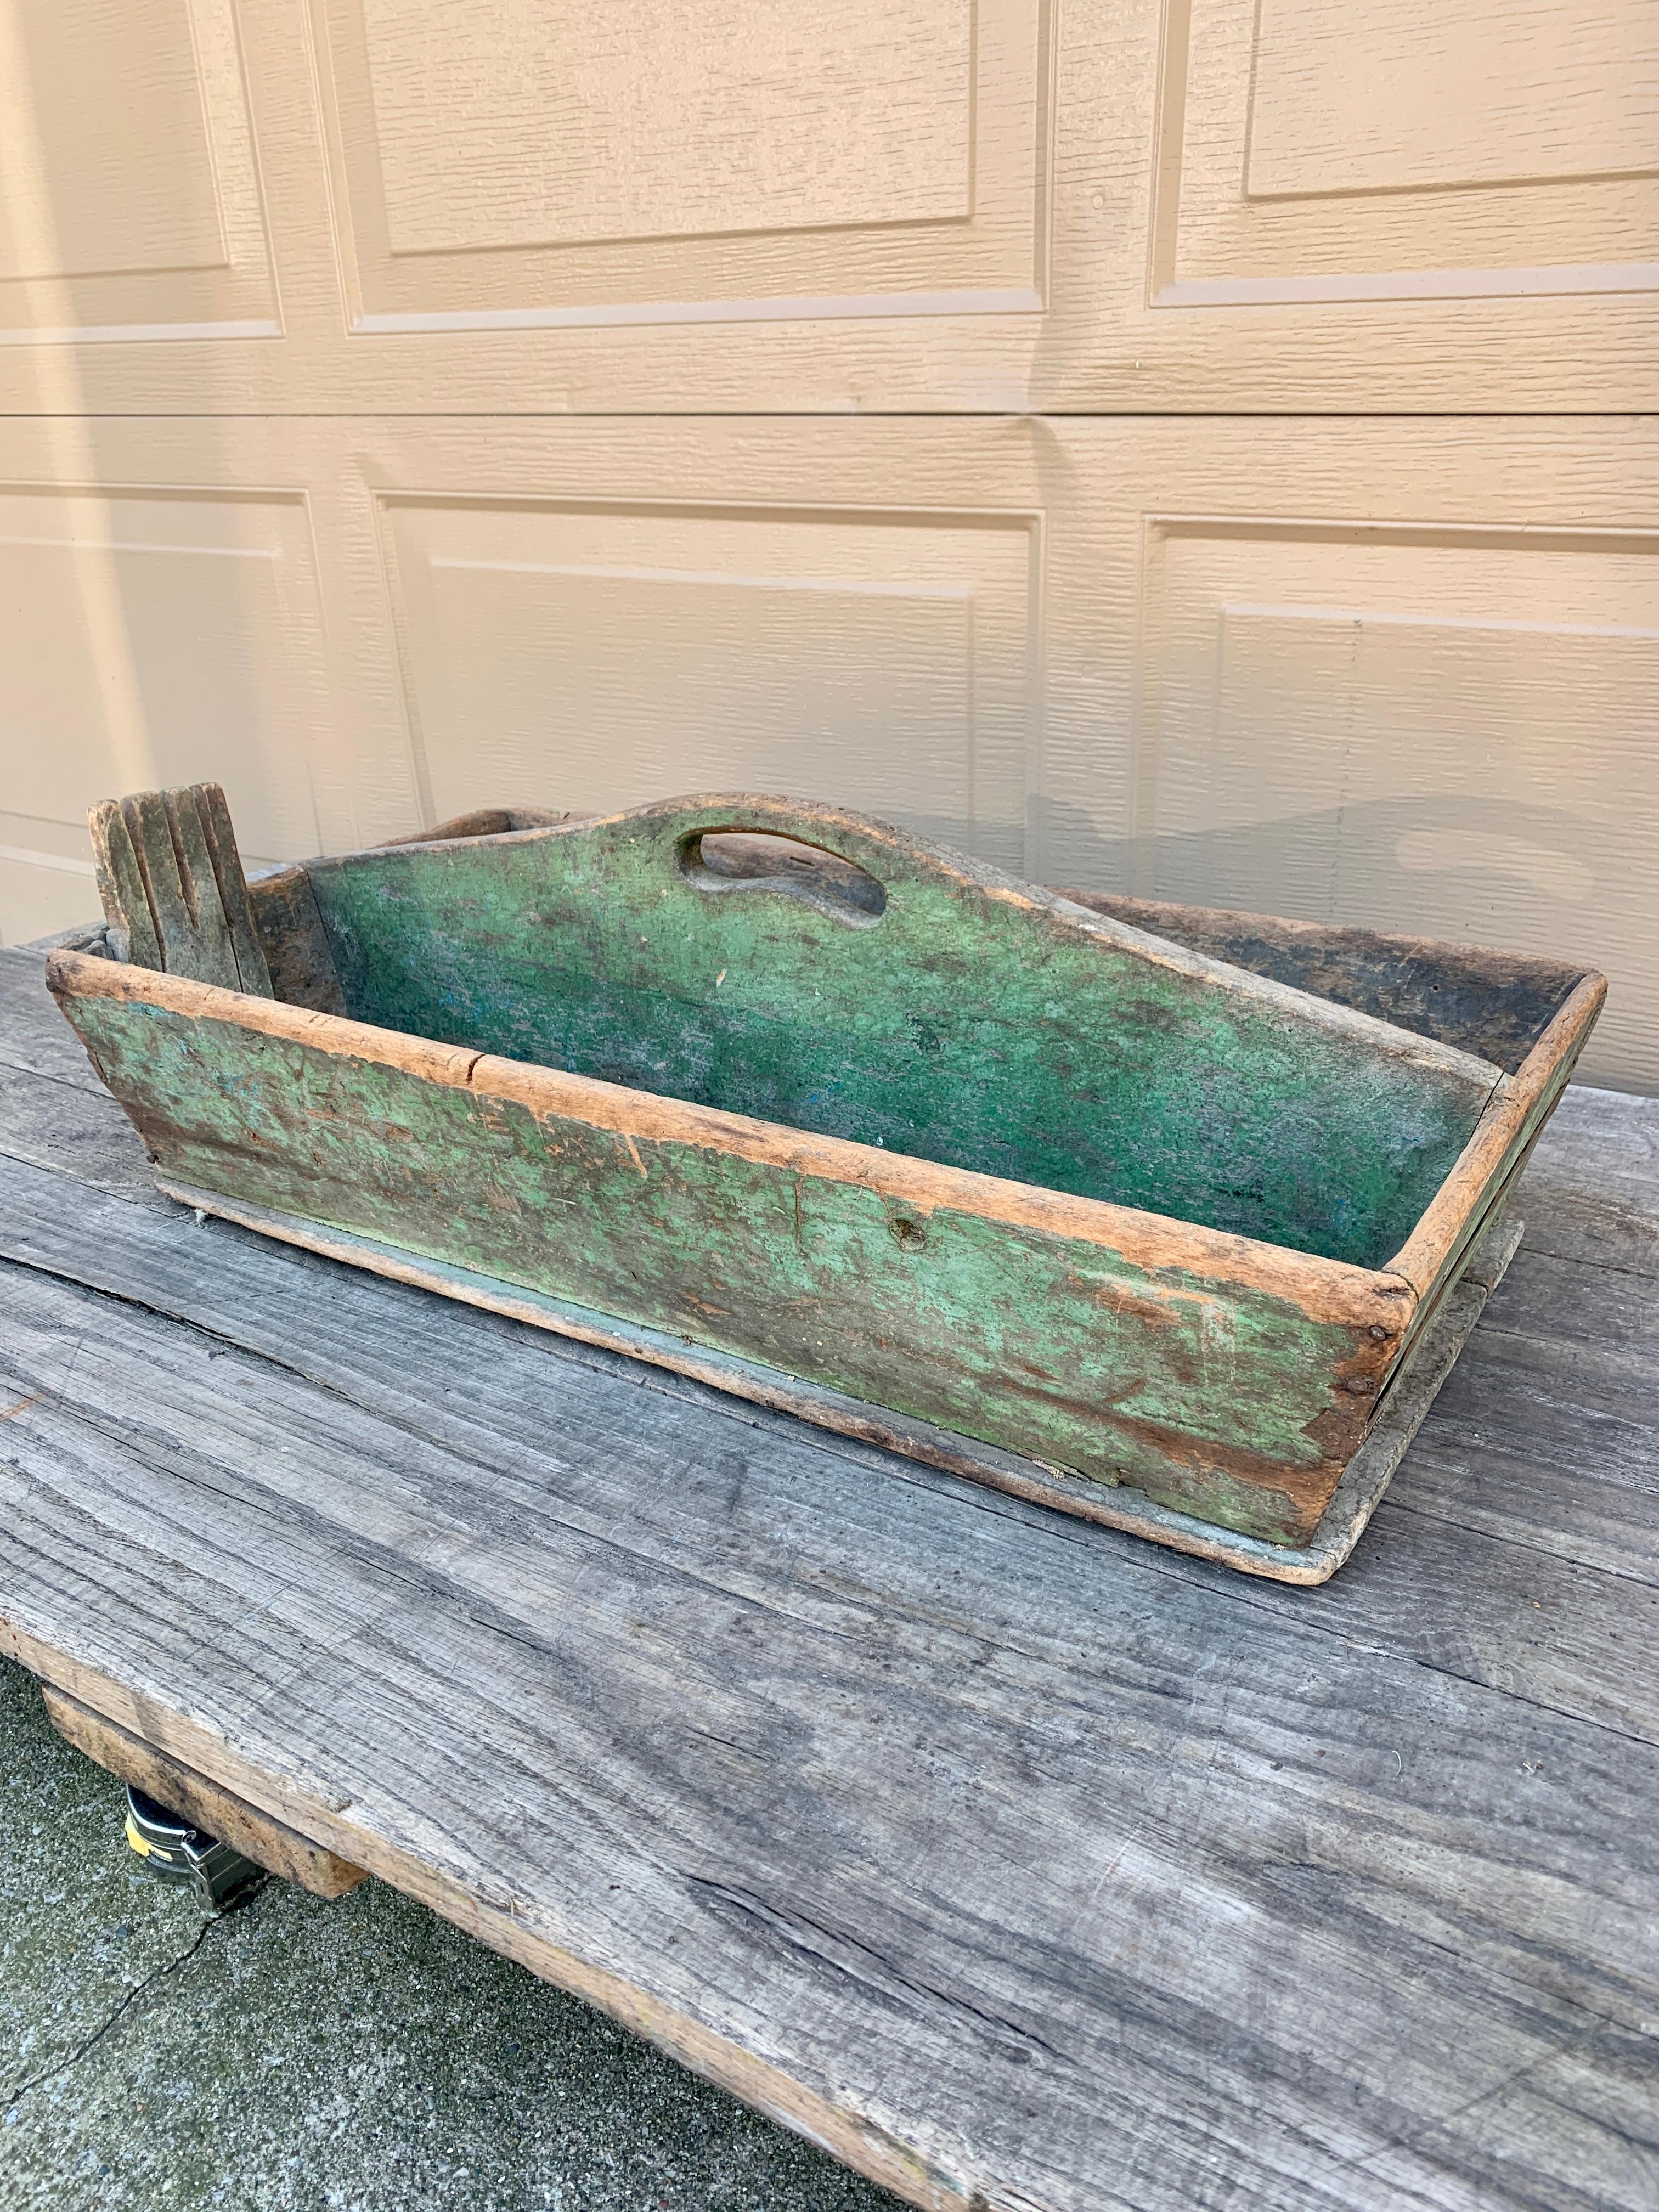 A charming country farmhouse wooden tool box trug painted in a beautiful green. This piece would be ideal as a craft organizer, silverware holder, or garden tool box.

USA, Early 20th Century

Measures: 26.75